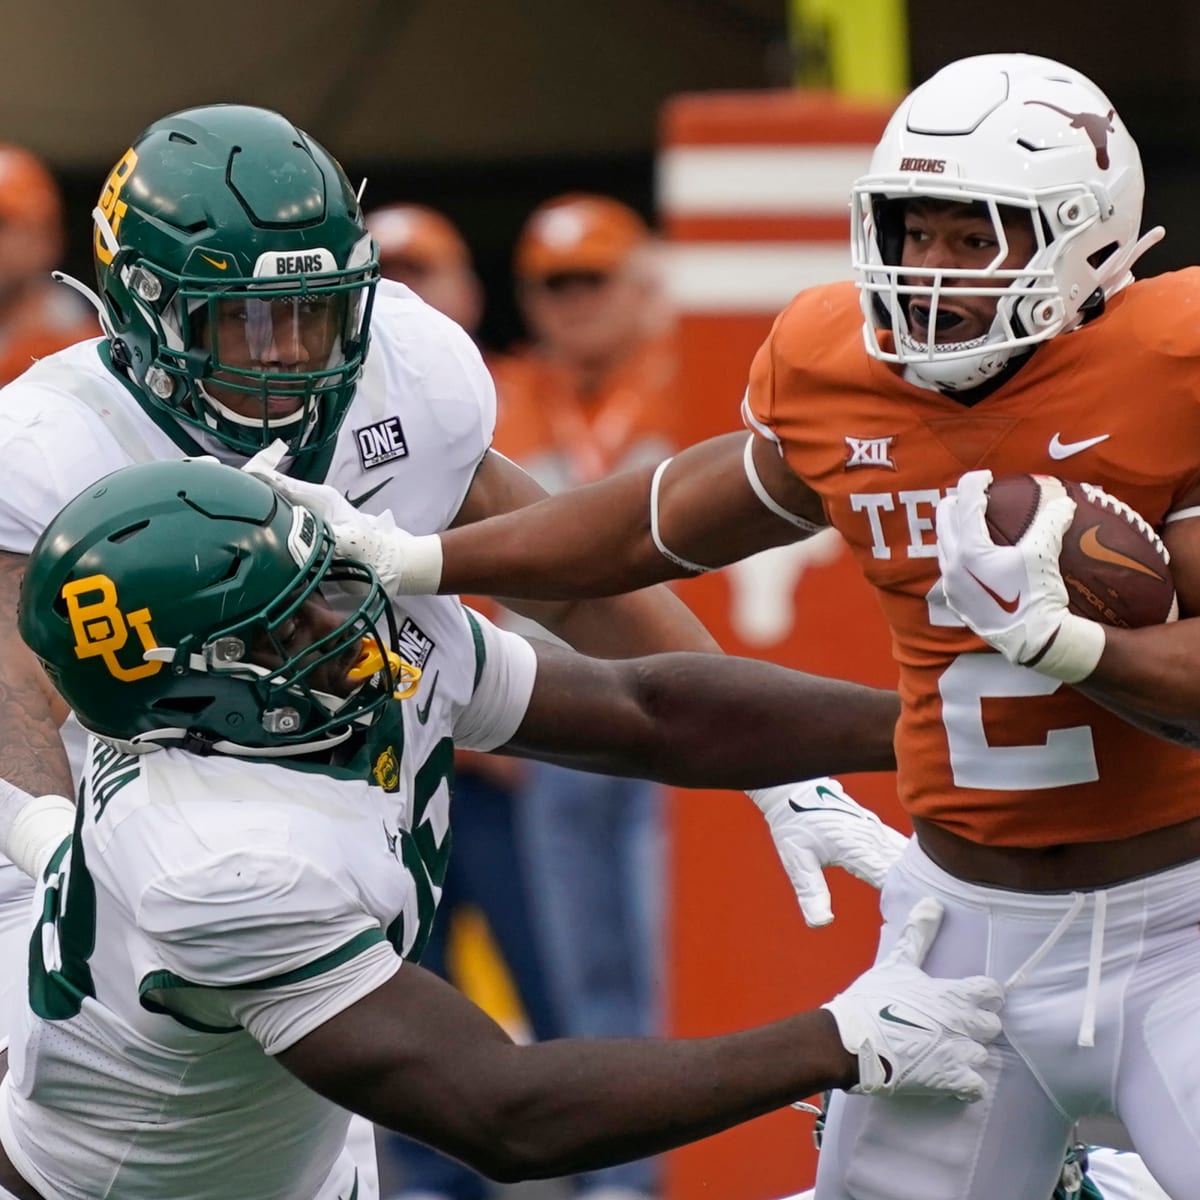 Checking Ticket Prices for Texas Longhorns vs. Baylor Bears